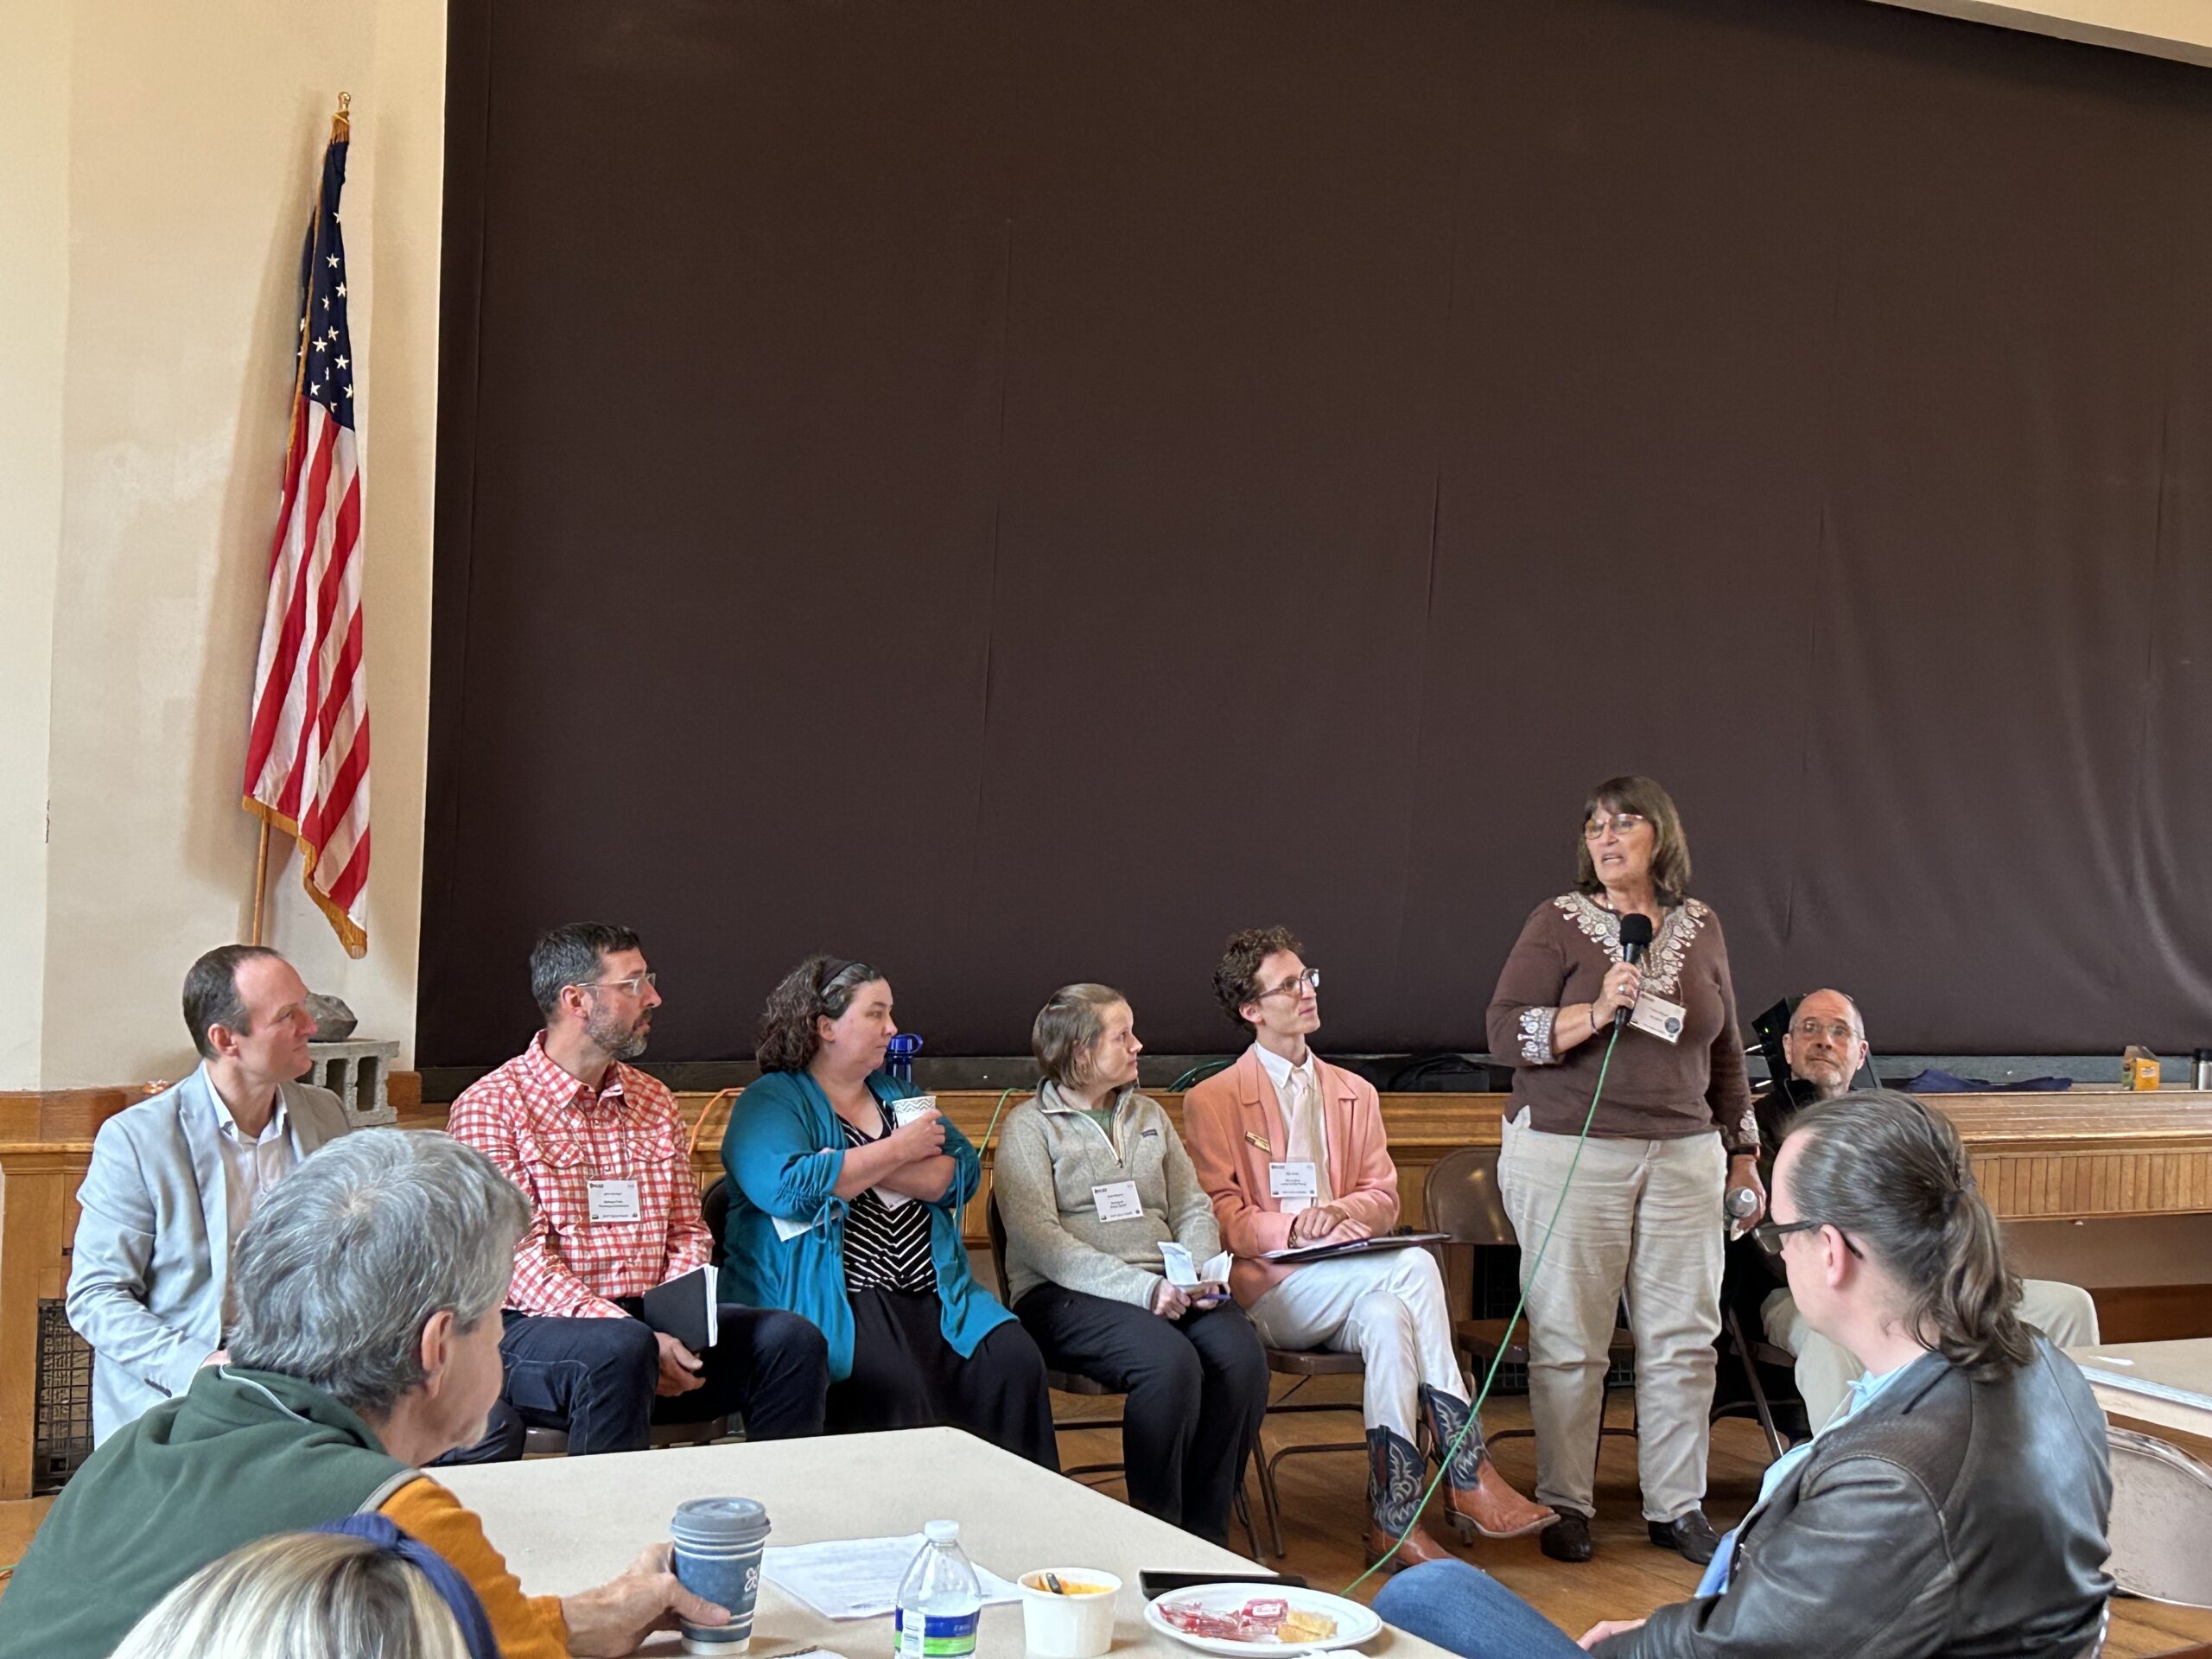 Brookline Select Board Chair Dot Maggio Speaks During A Local Leaders Panel In Townshend On 10/21/21